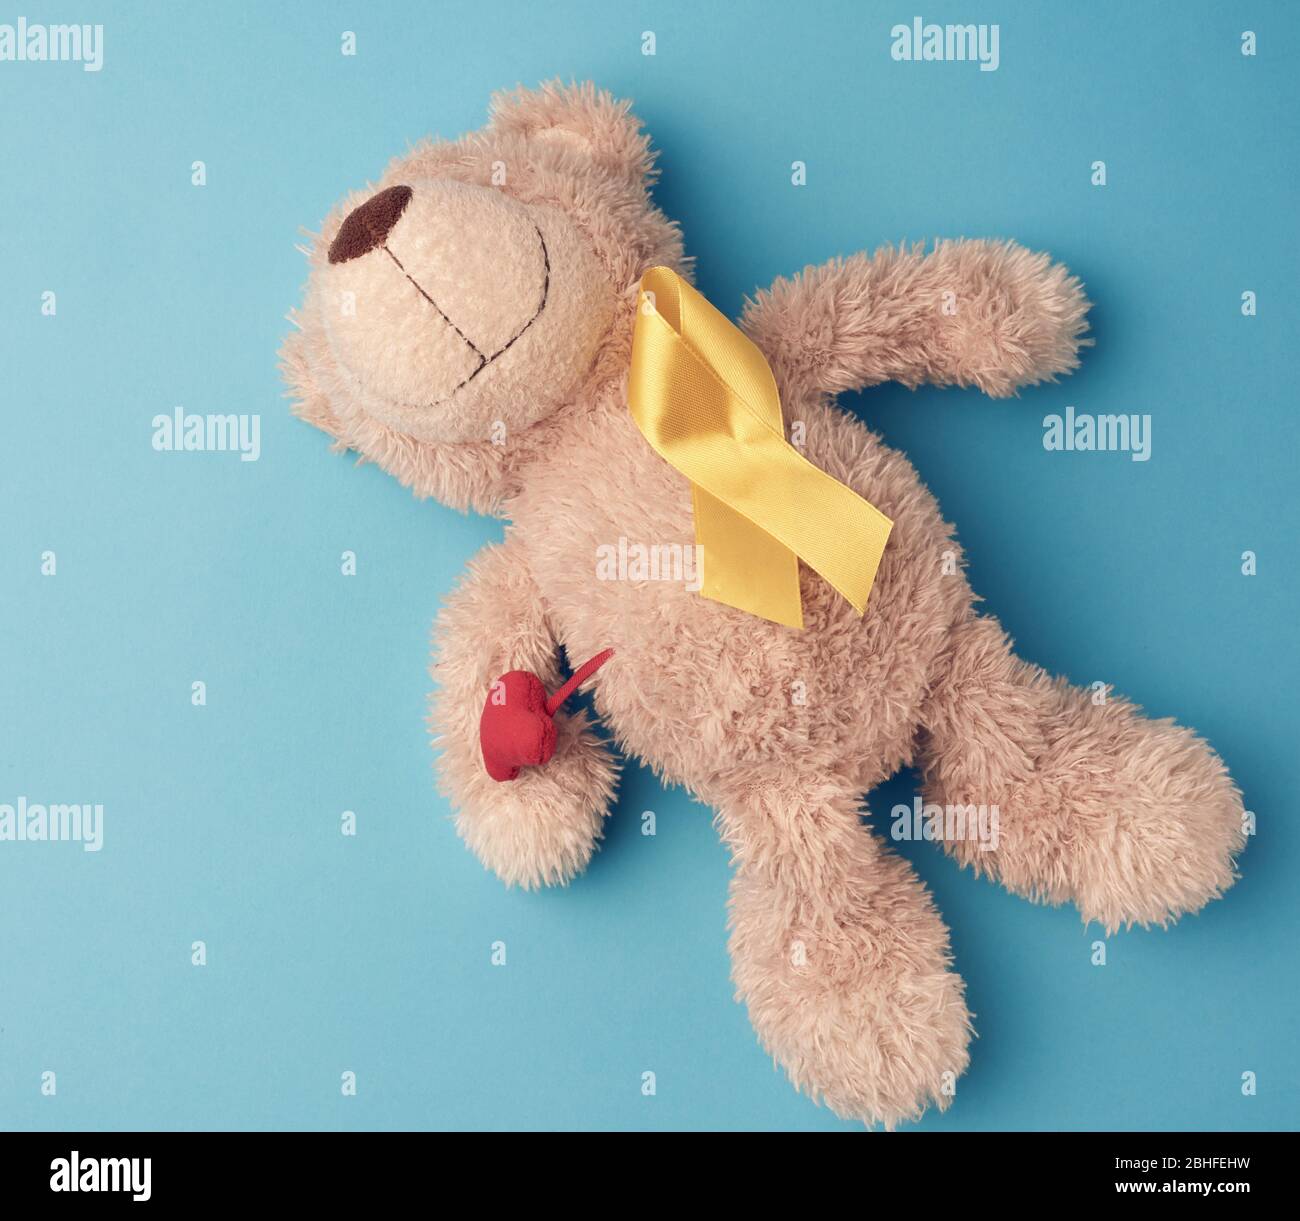 teddy bear holds in his paw a yellow ribbon folded in a loop on a blue background. concept of the fight against childhood cancer. problem of suicides Stock Photo